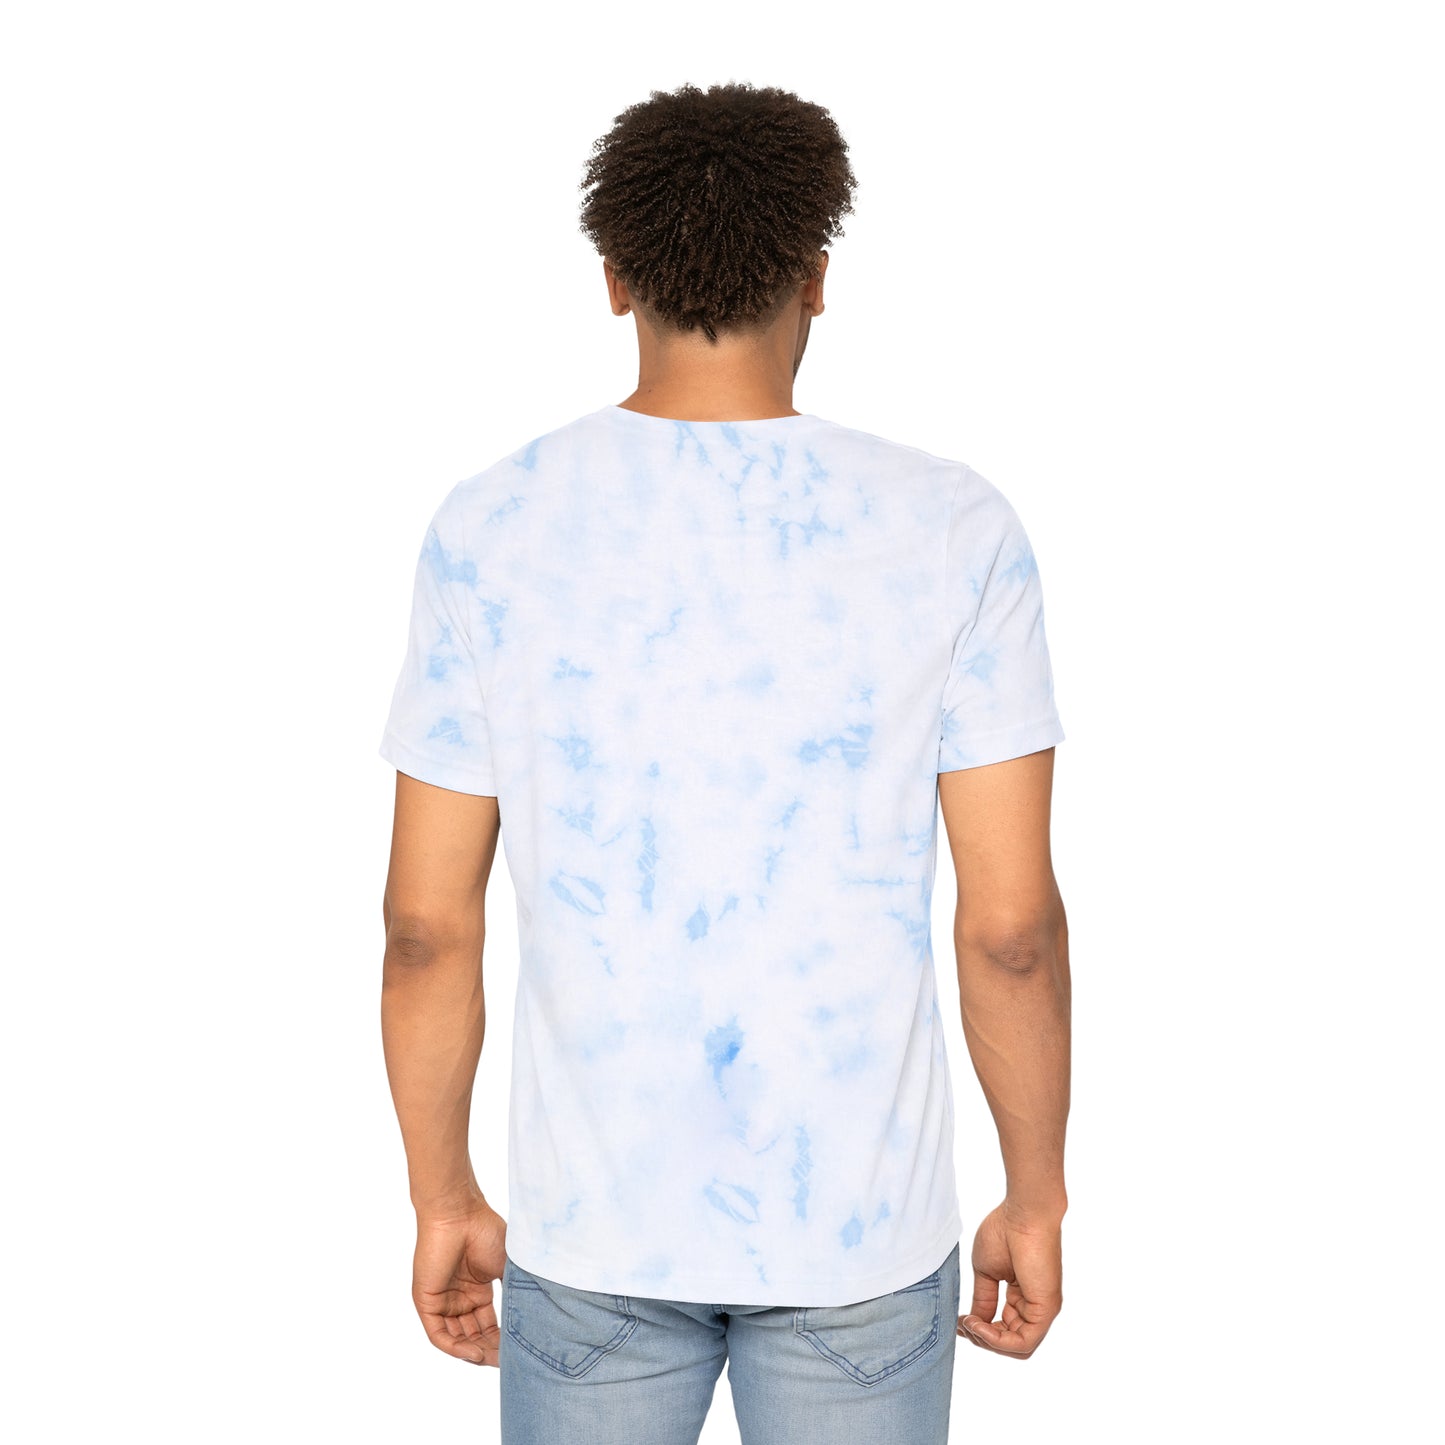 Lion Tie-Dyed T-Shirt